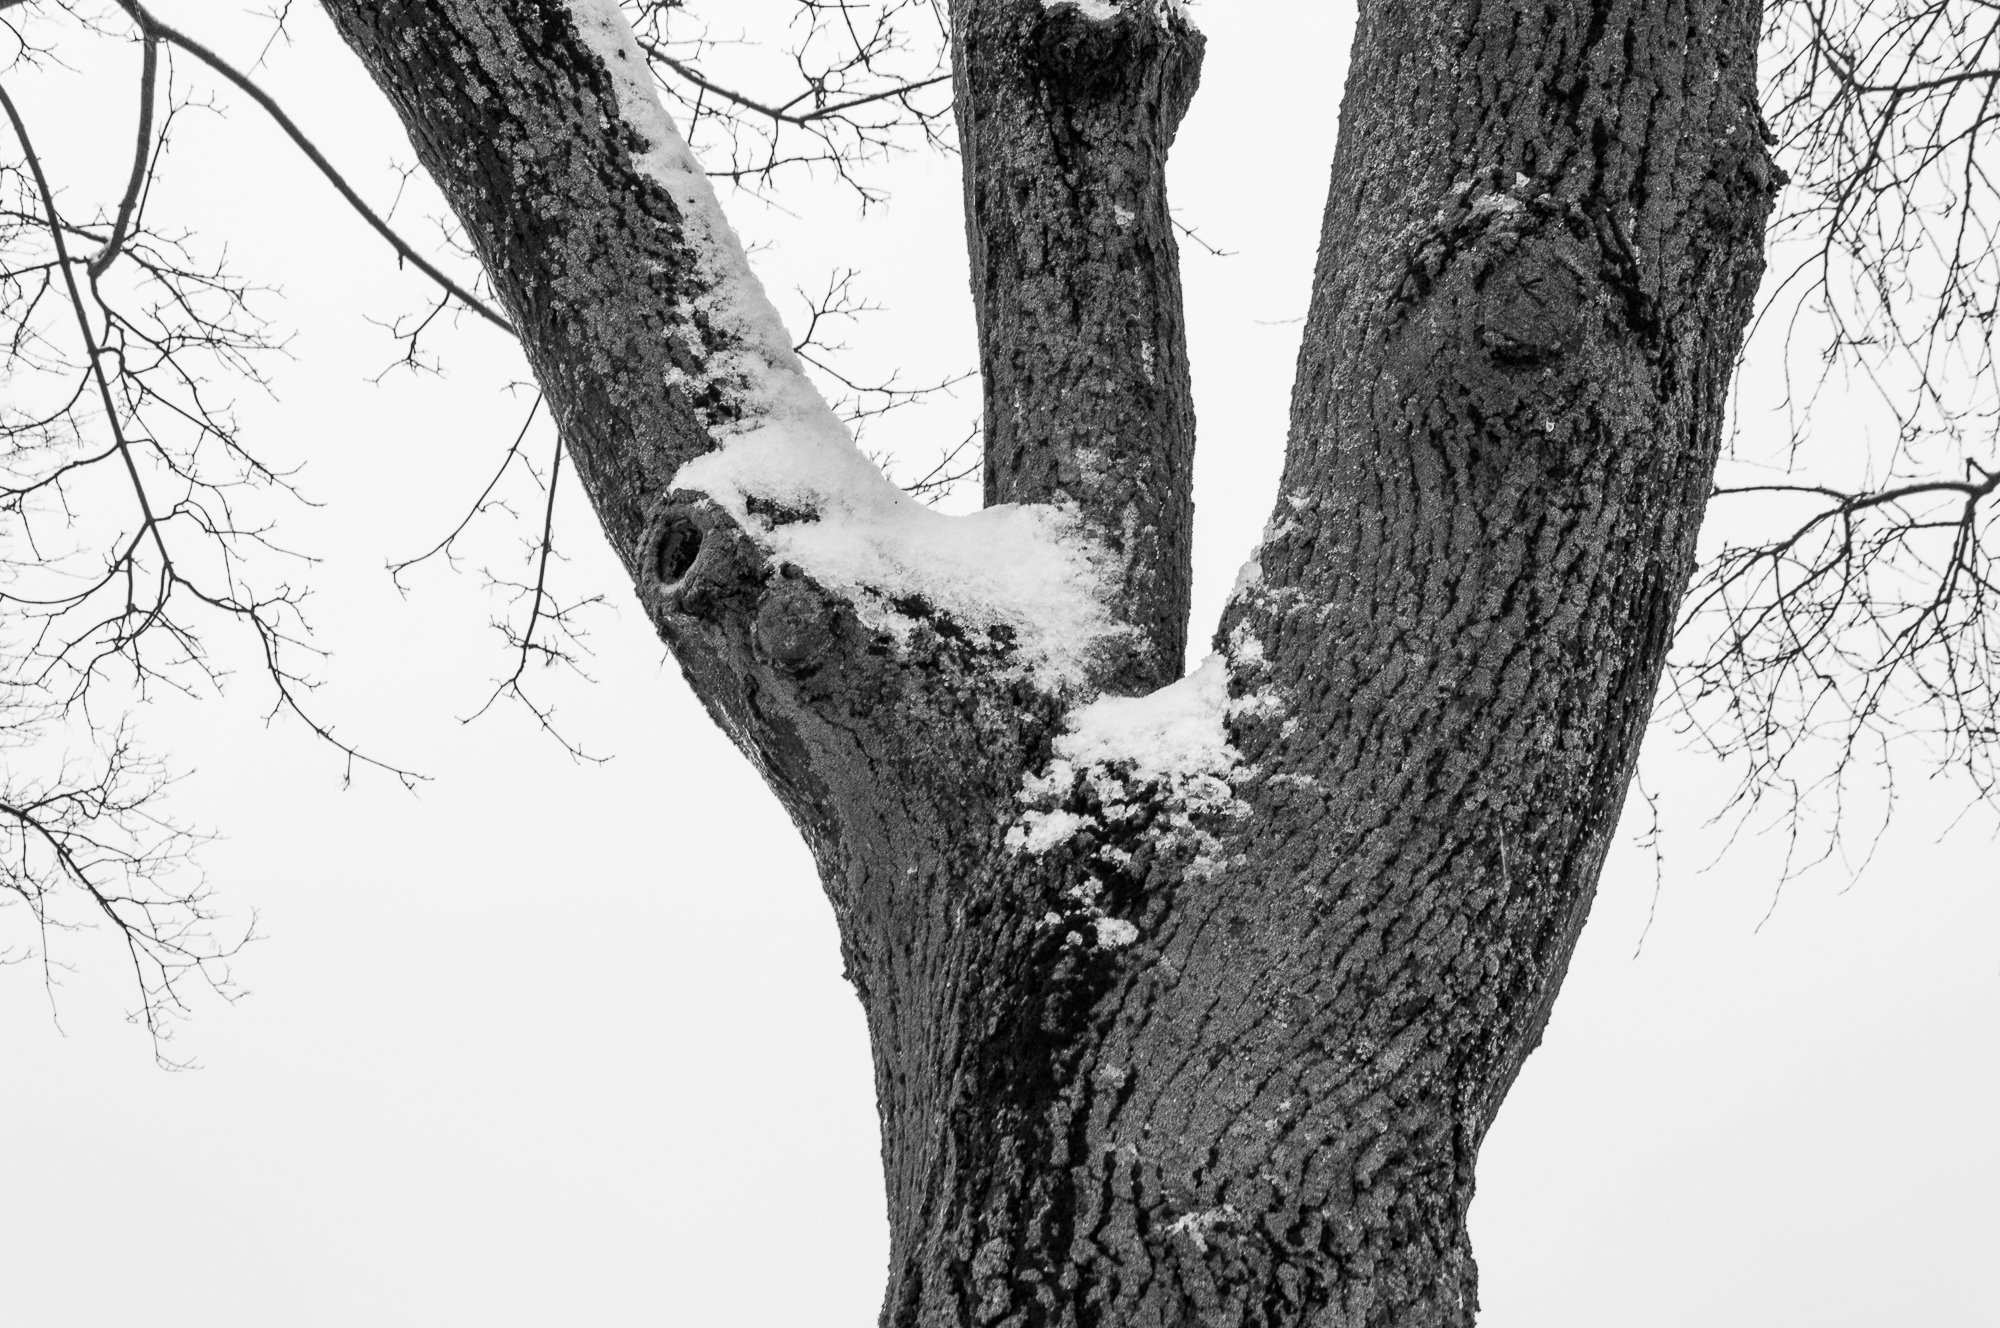 Adam Mazek Photography. Warsaw (Warszawa) 2019. Tree. Post: "Two steps to becoming an independent artist.."